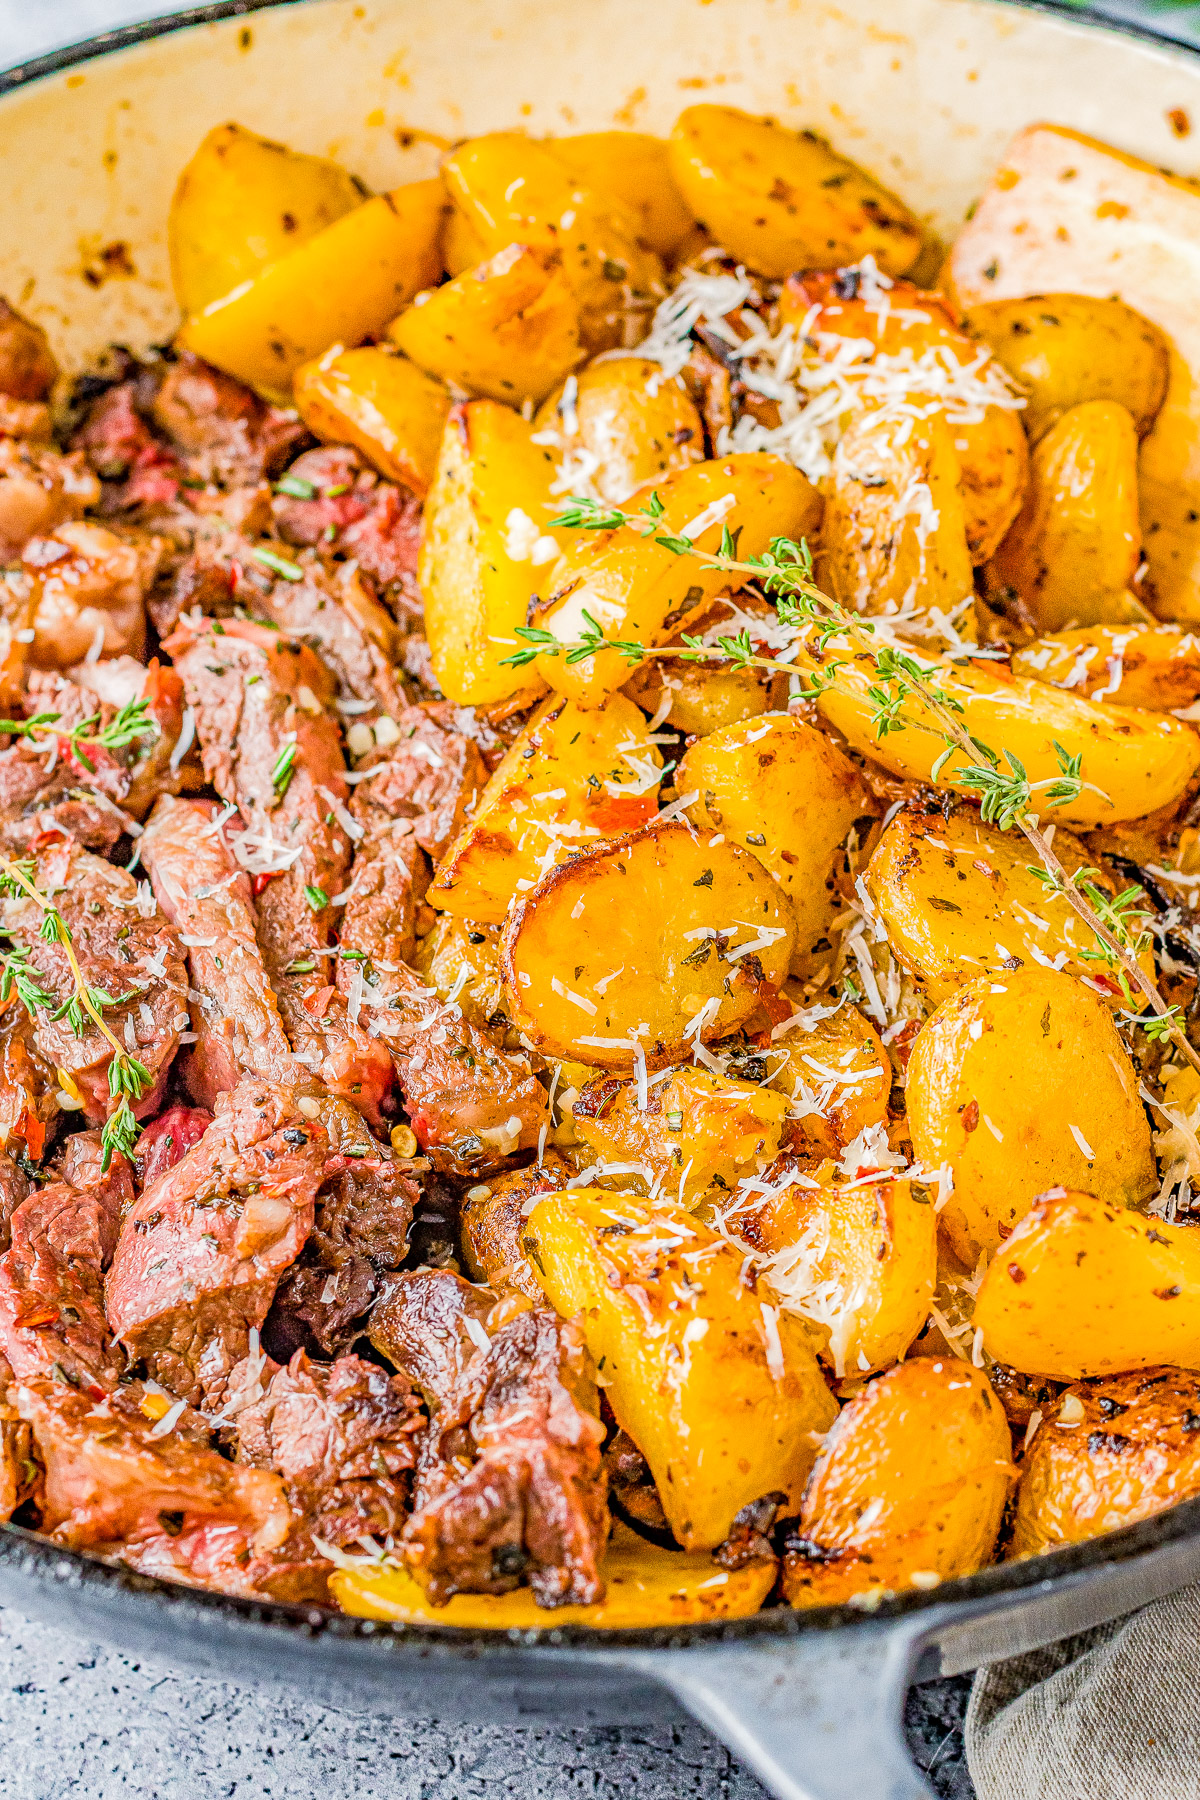 Steak and Potatoes Skillet - Made with garlic butter, herbs and spices, these juicy steak bites just melt in your mouth! Plus there are buttery and tender potatoes with lightly crisped edges. Made in just ONE skillet and ready quickly, my EASY recipe walks you through how to make the PERFECT steak and potatoes meal!